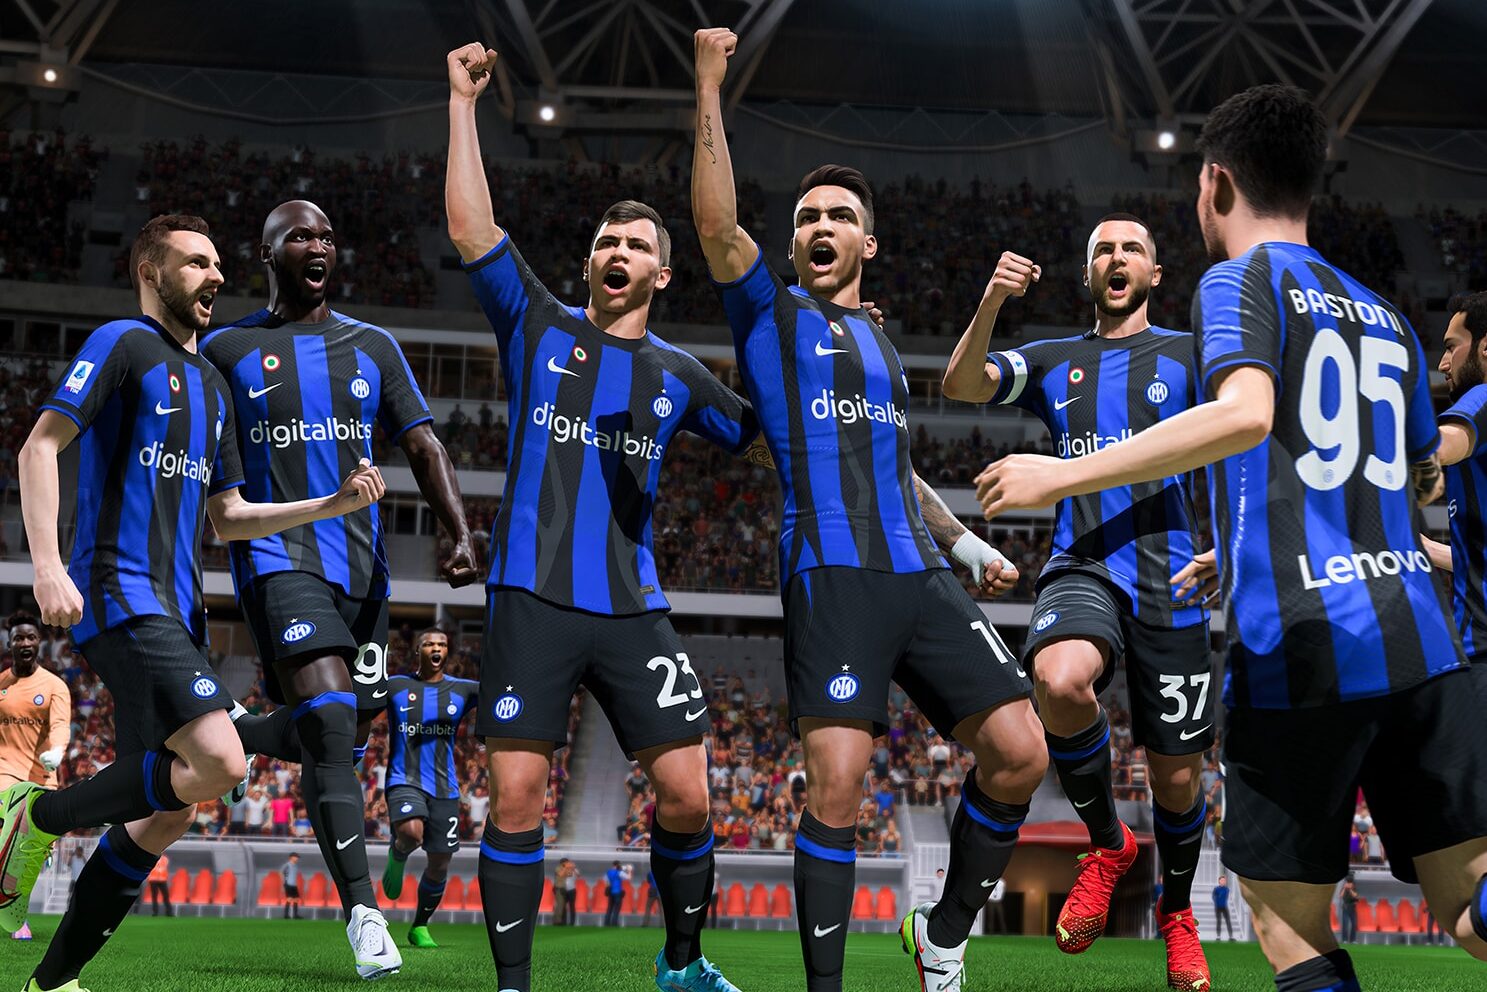 FIFA Game Scores One Last Time For Electronic Arts